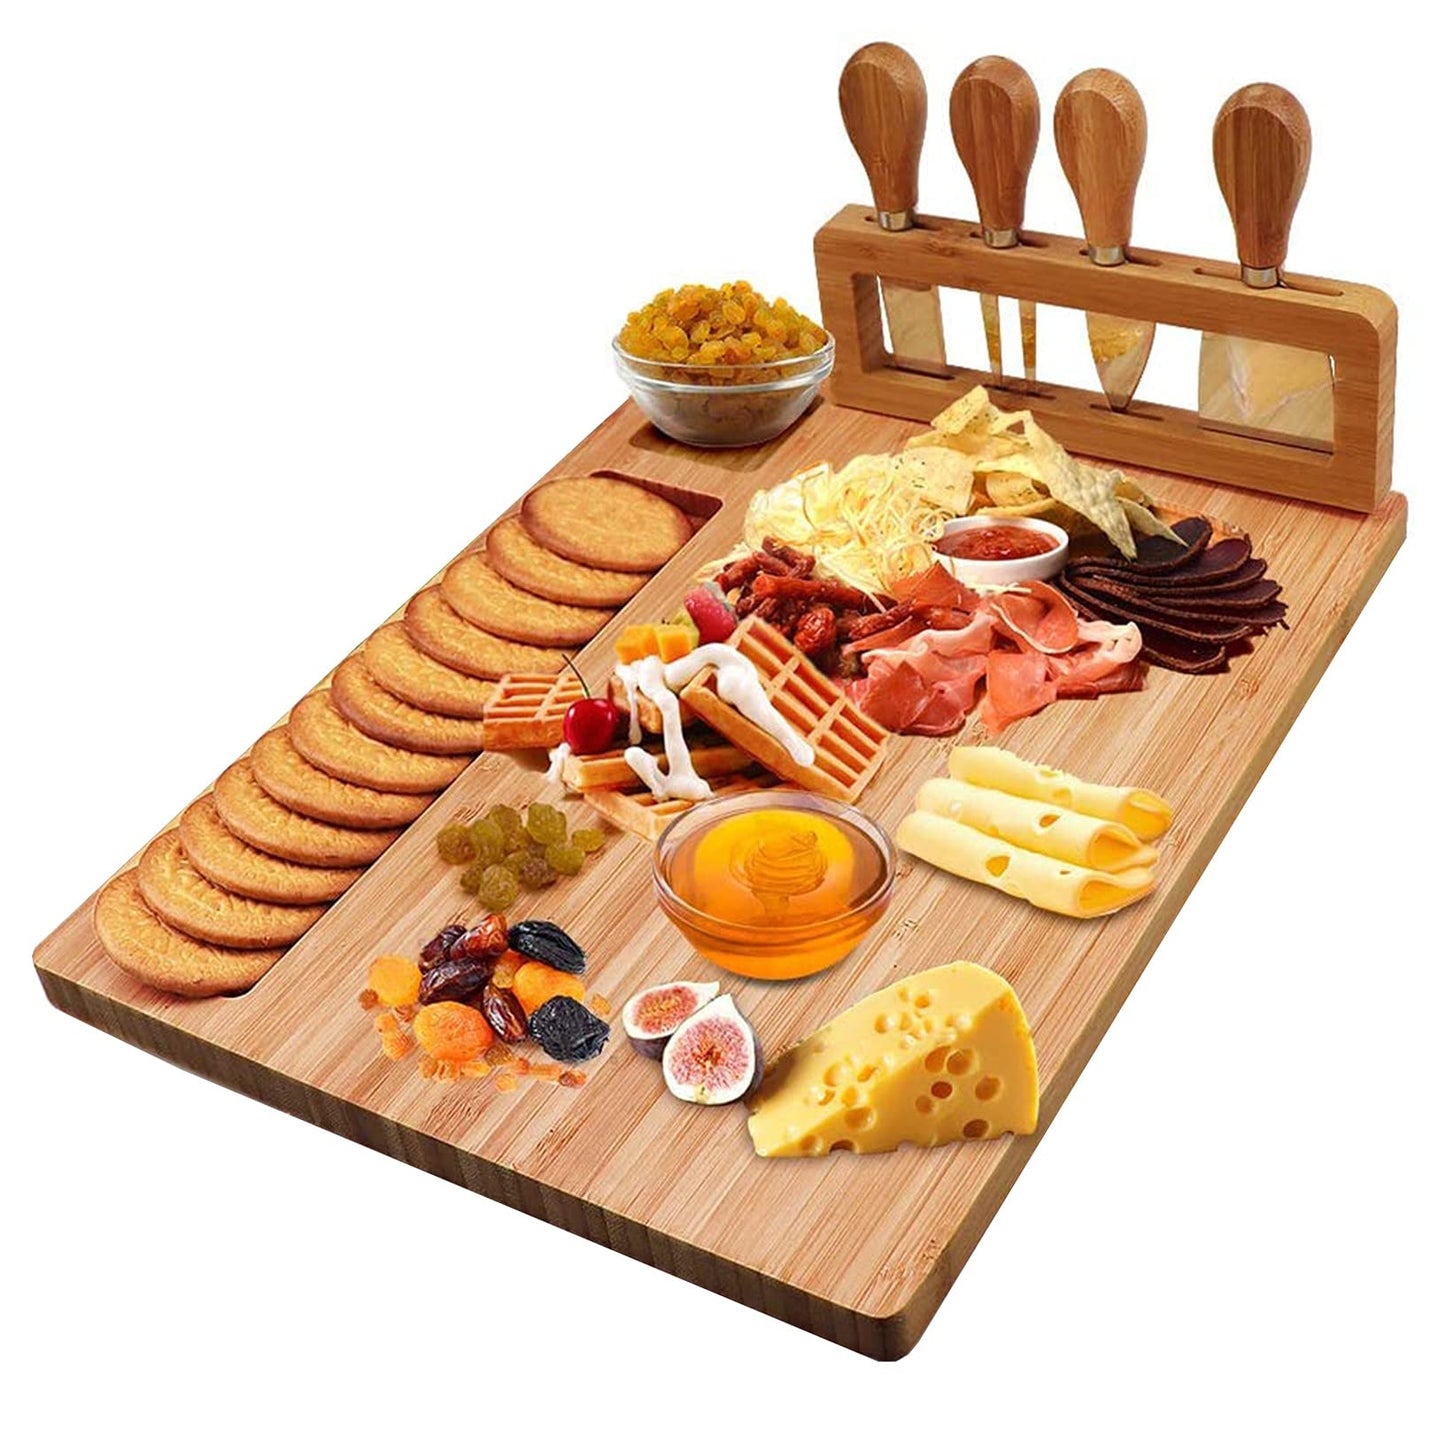 Bamboo Cheese Board Set, Cheese Tray, Charcuterie Board and Serving Meat Platter with 4 Stainless Steel Cheese Knives, Ideal for Wedding Gifts